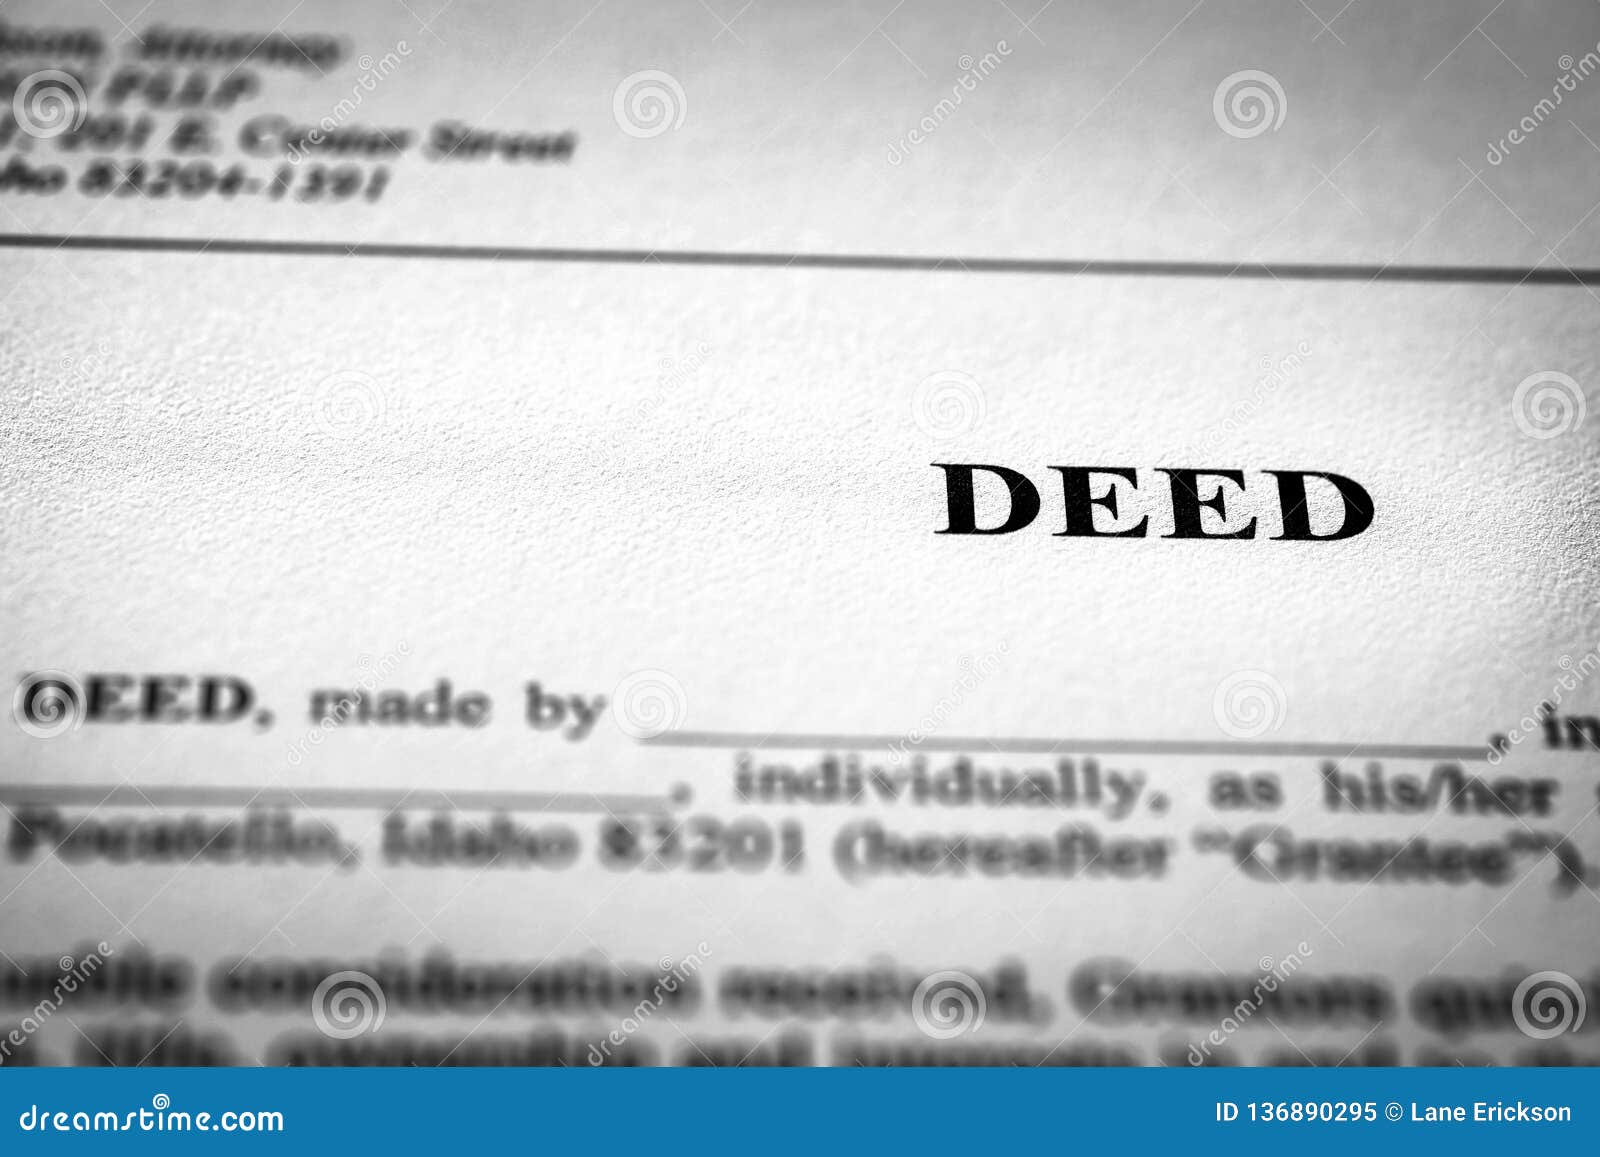 deed to real estate transfer title